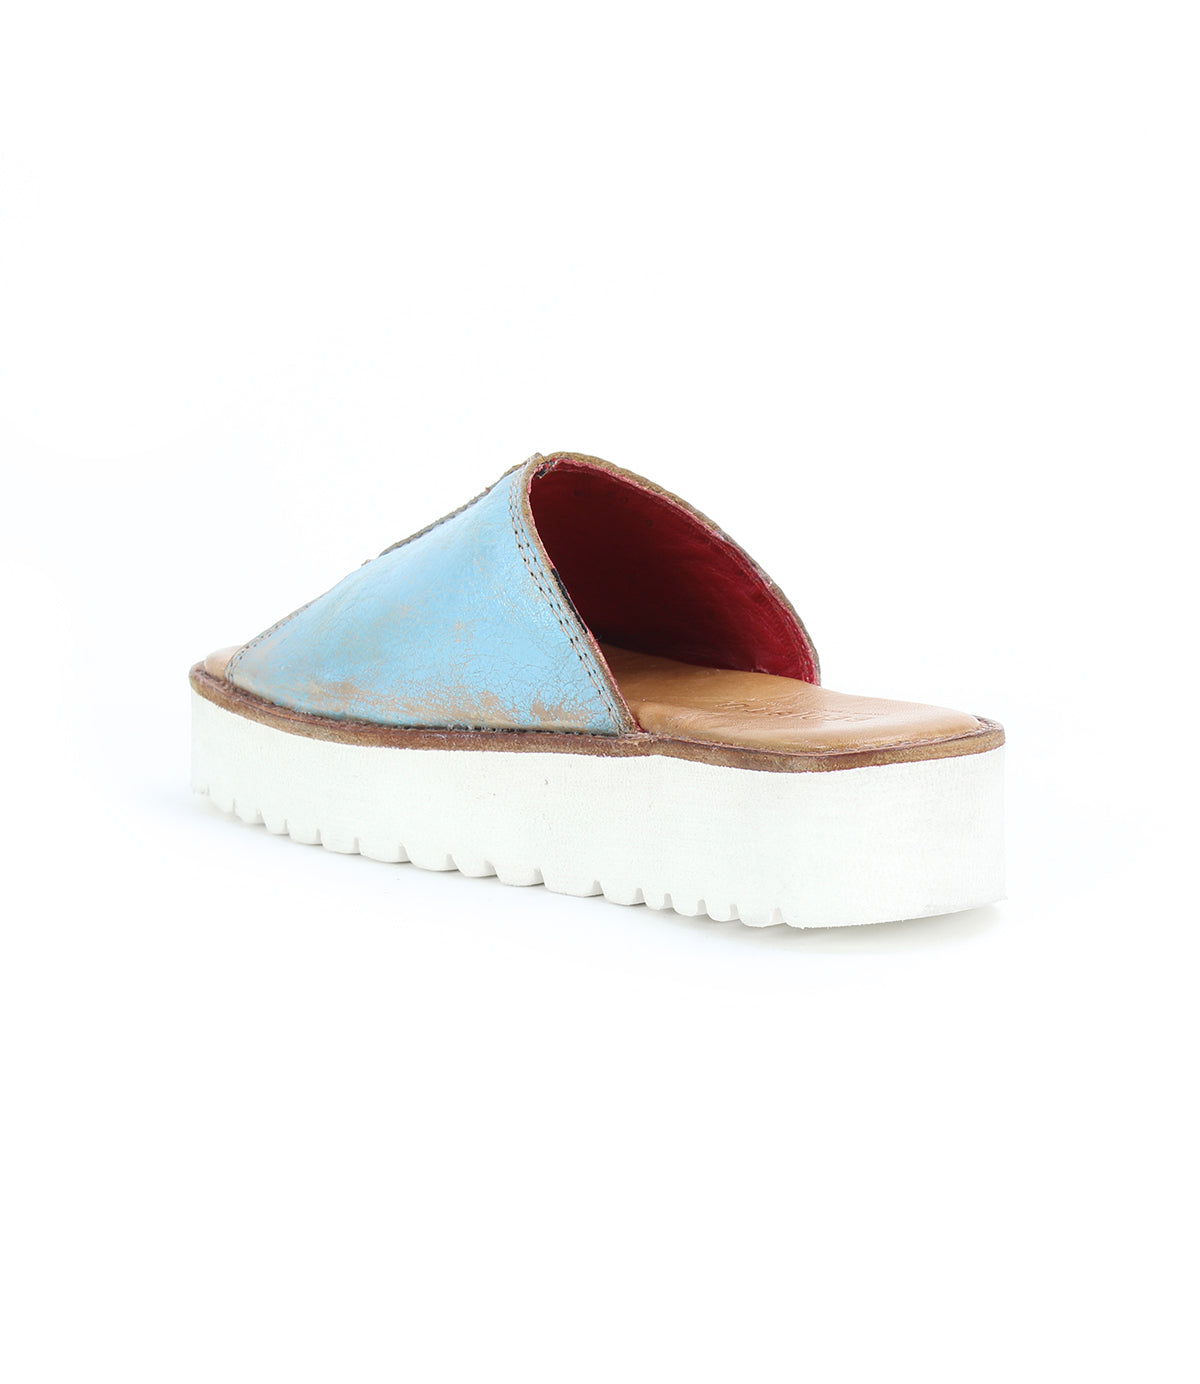 A comfortable Fairlee II slipper with a leather slide sandal style by Bed Stu.